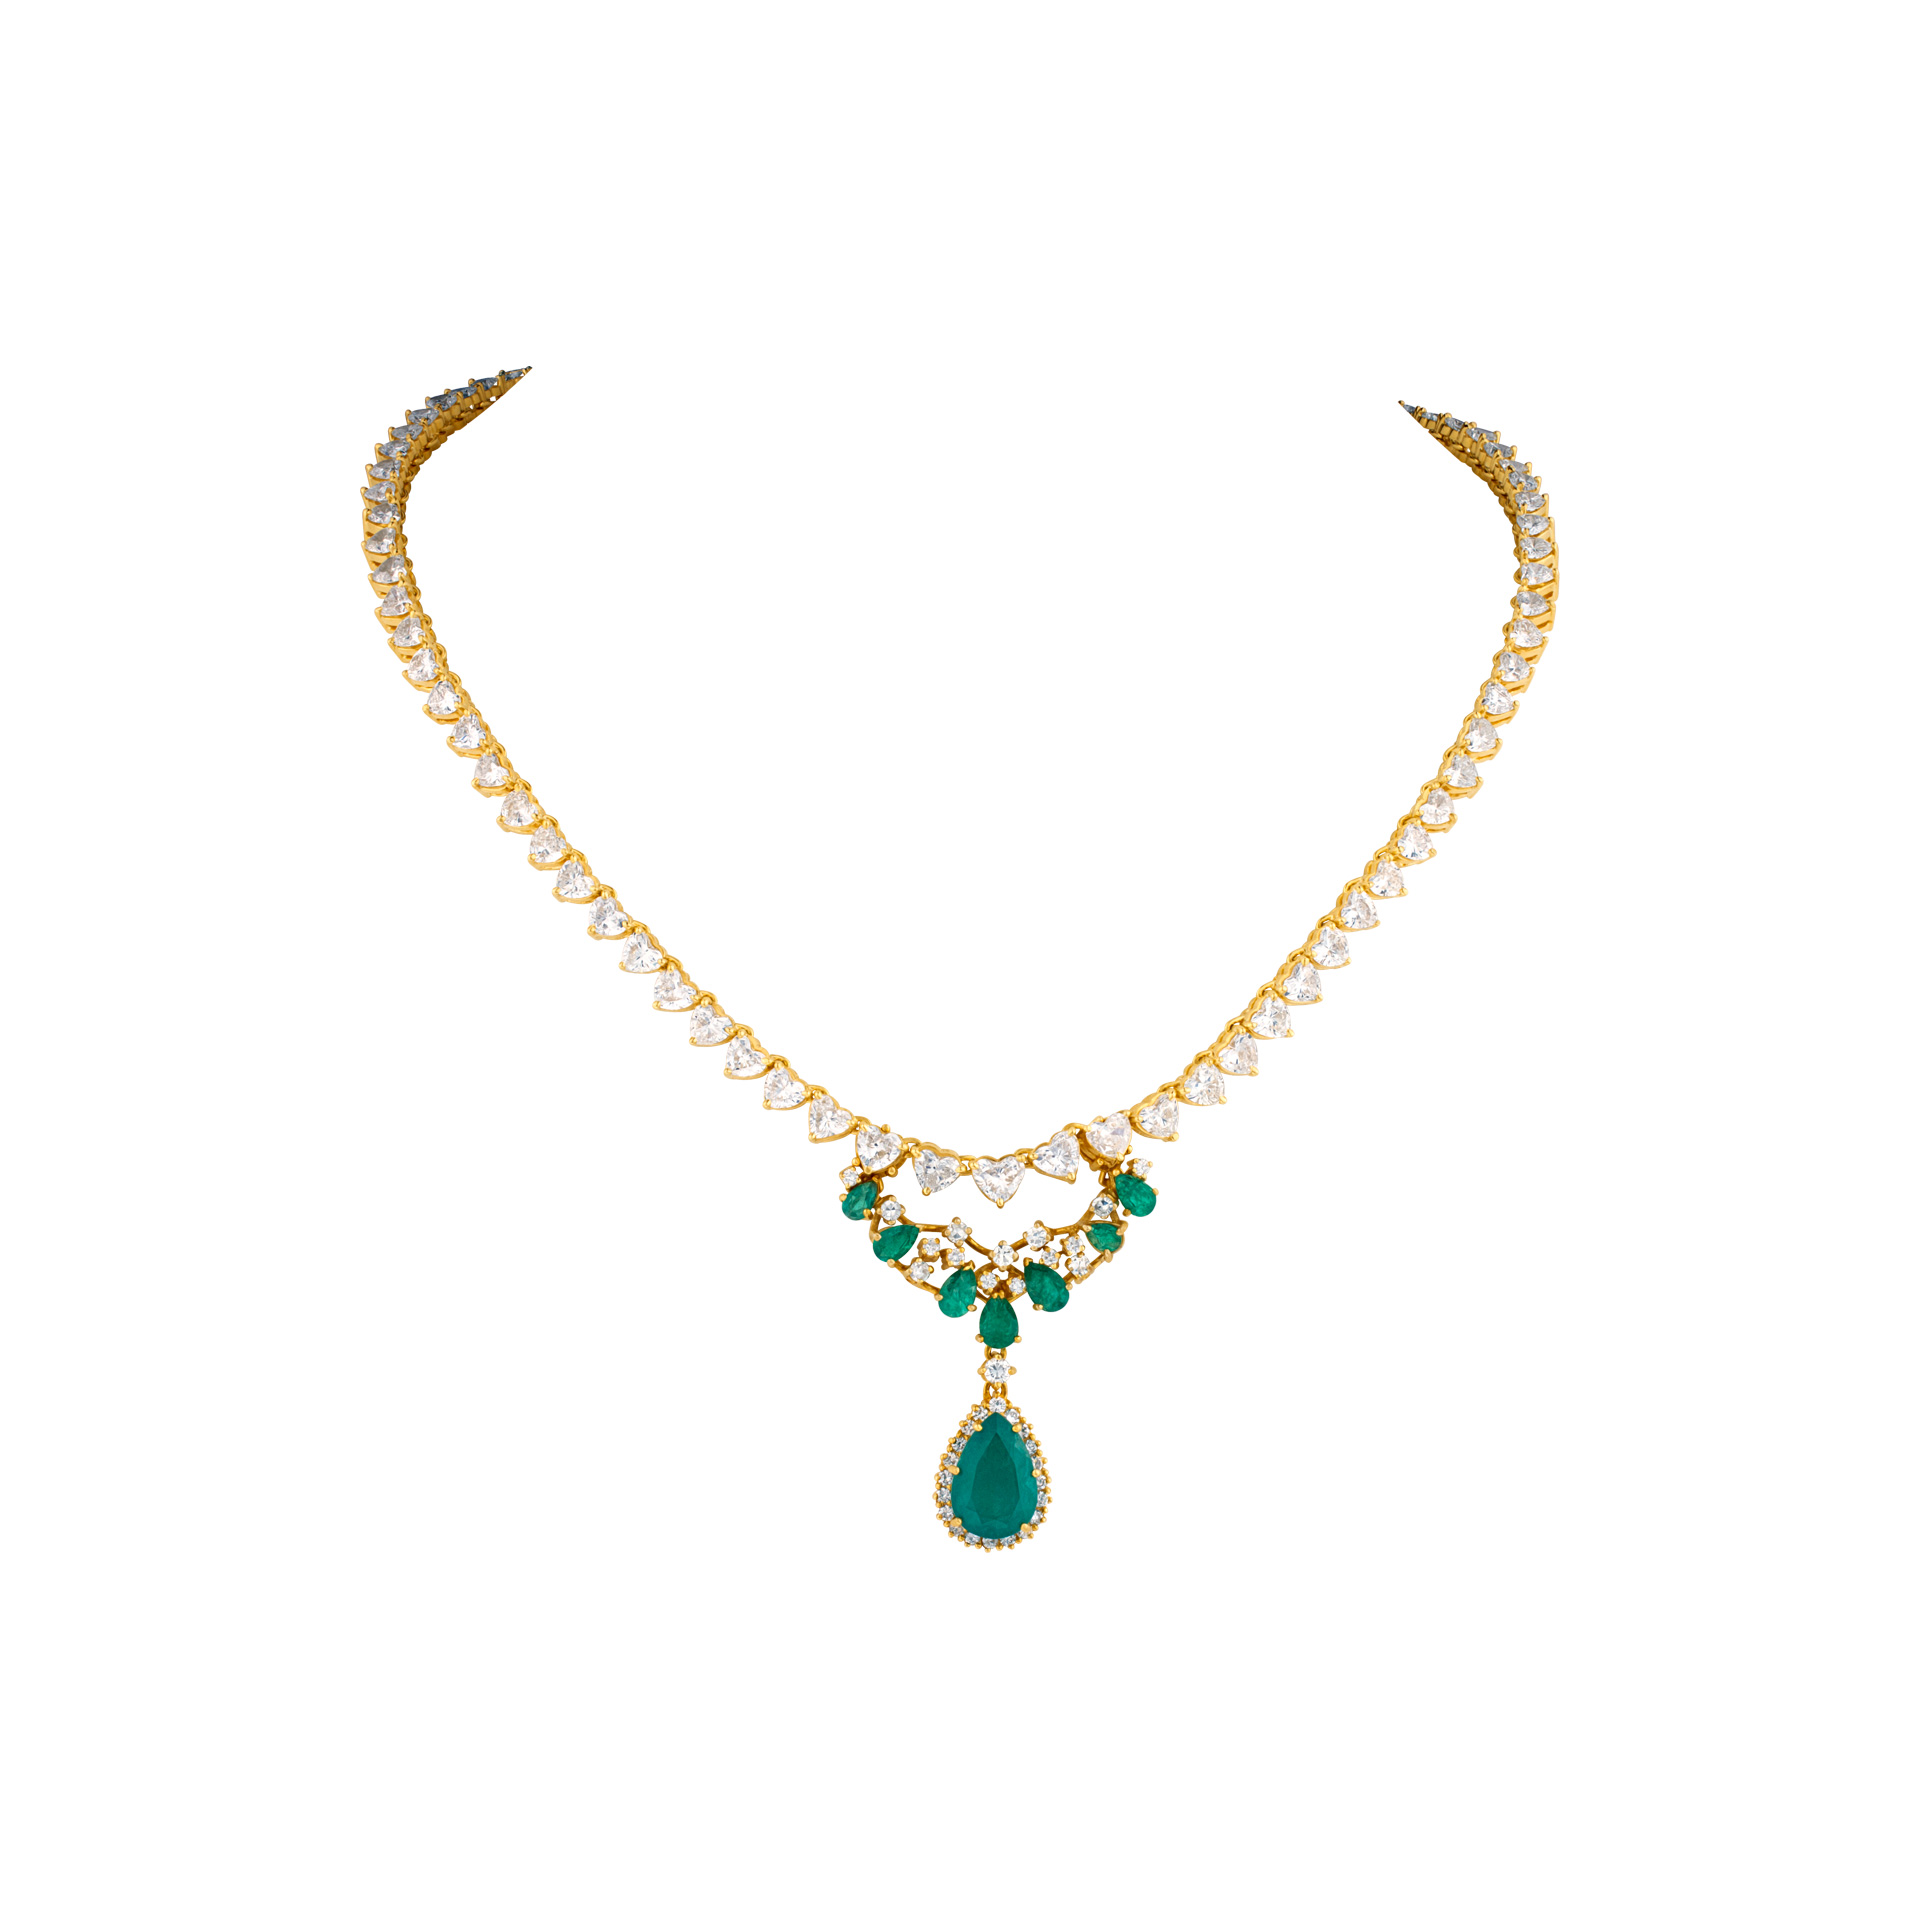 Heart shaped diamond necklace in 18k yellow gold w/ removable emerald pendant drop image 1